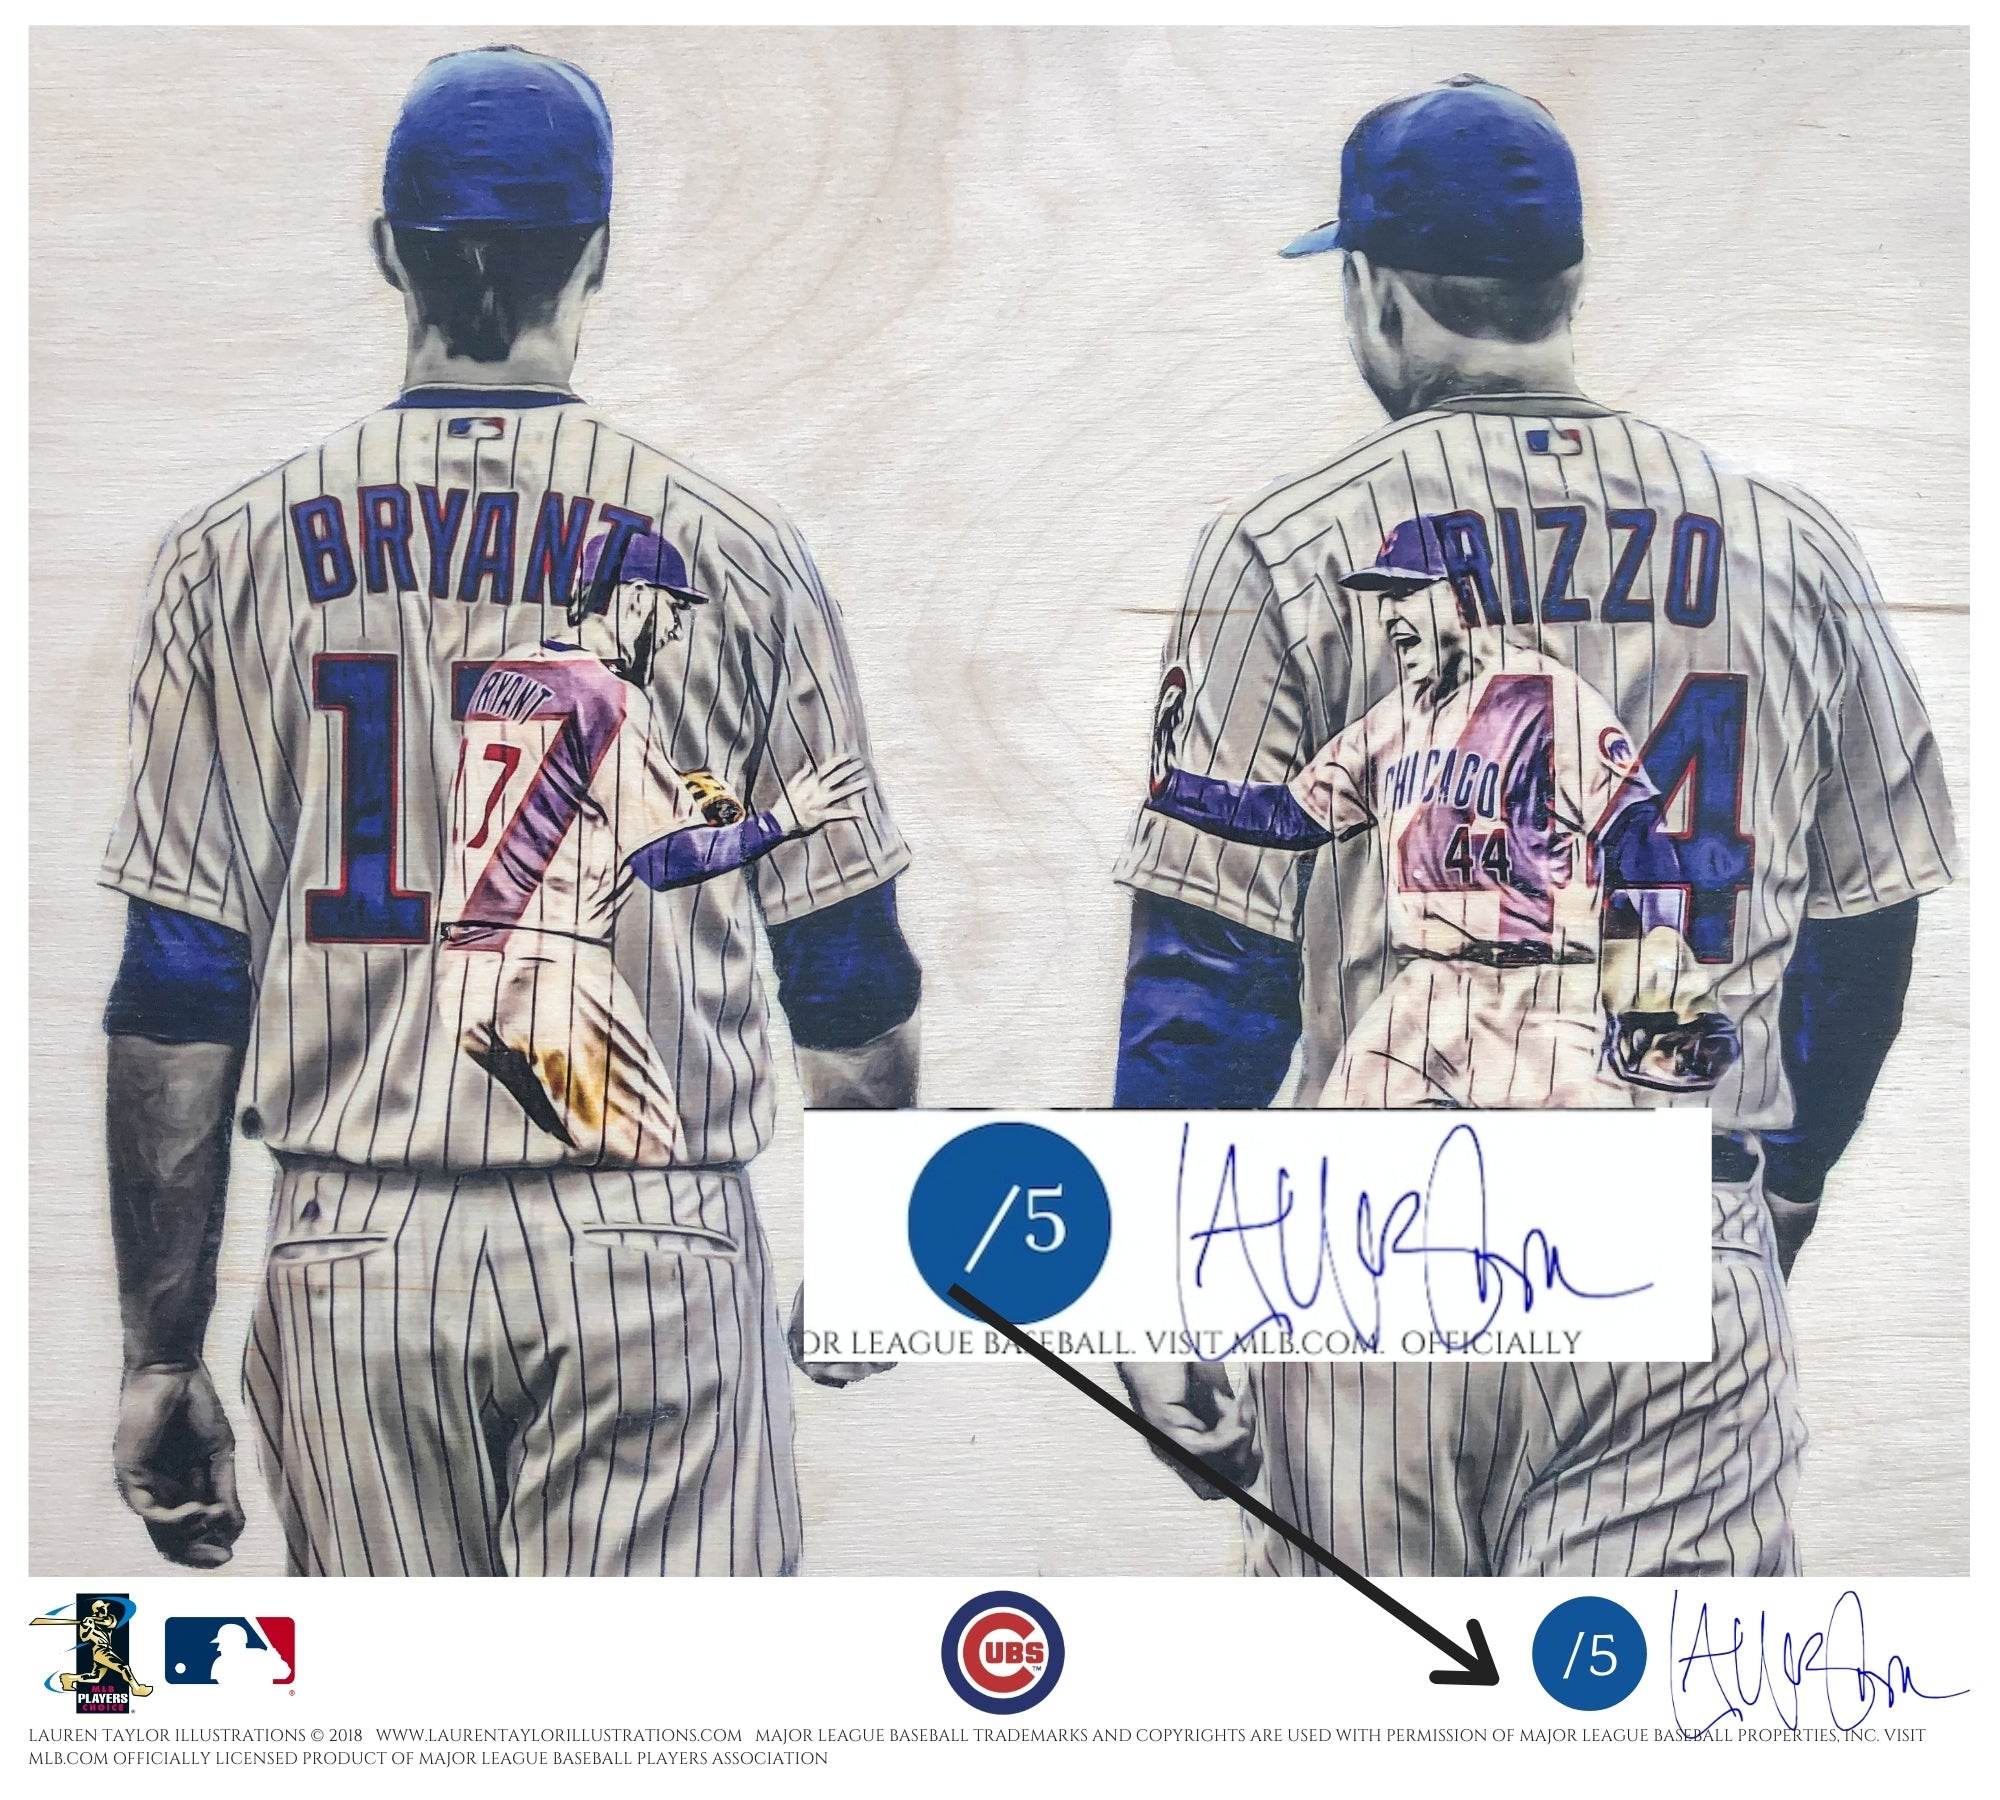 Anthony Rizzo Chicago Cubs Framed Autographed Pinstripe Jersey Collage